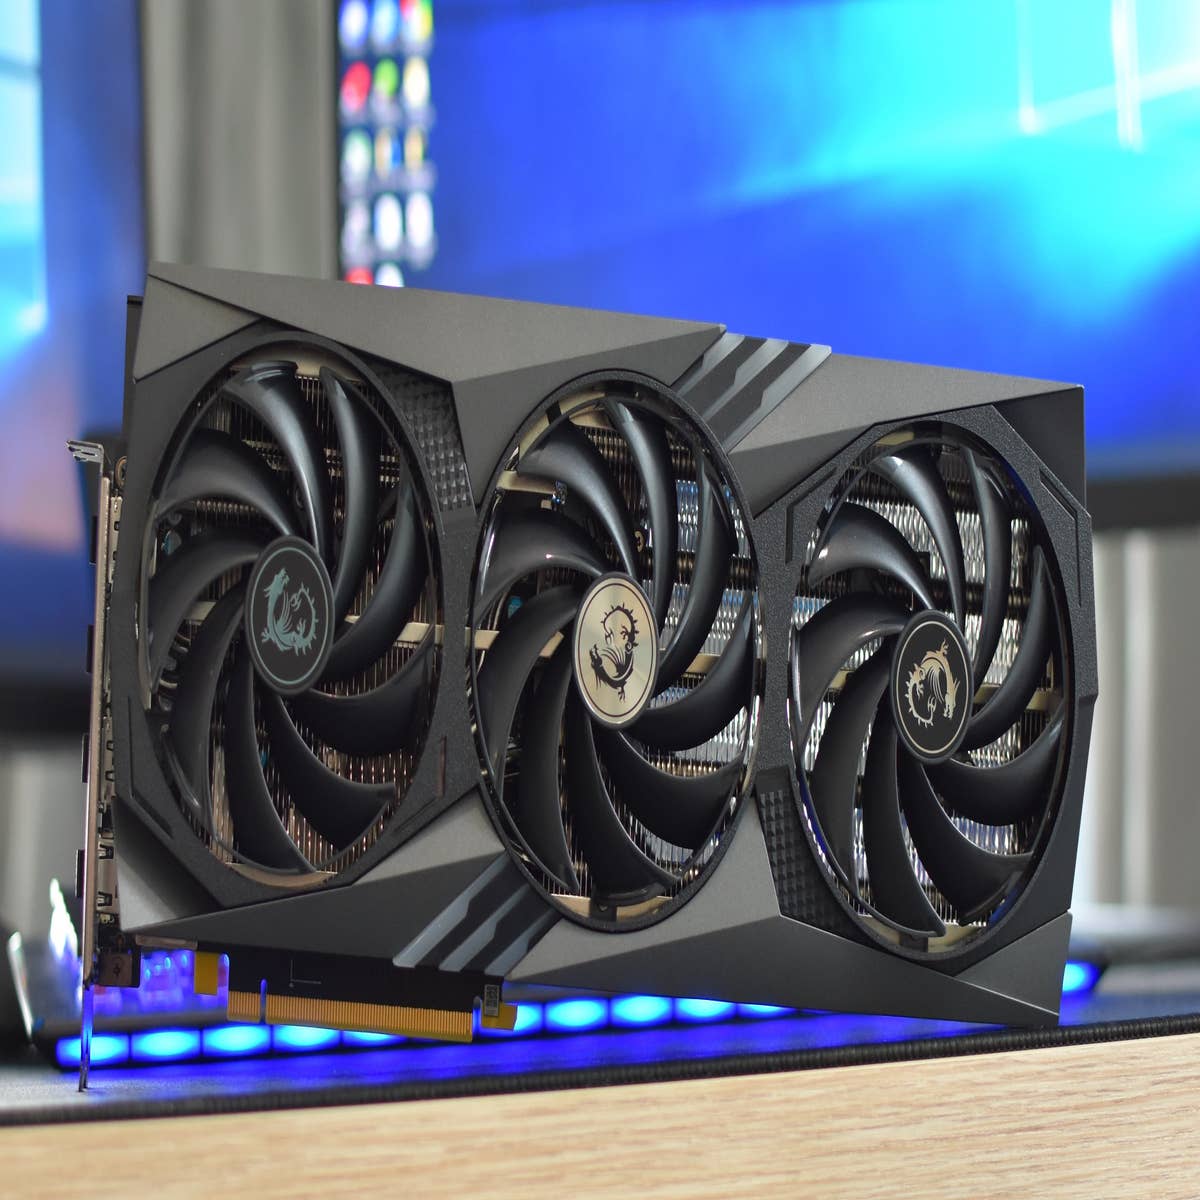 MSI Nvidia GeForce RTX 4060 review